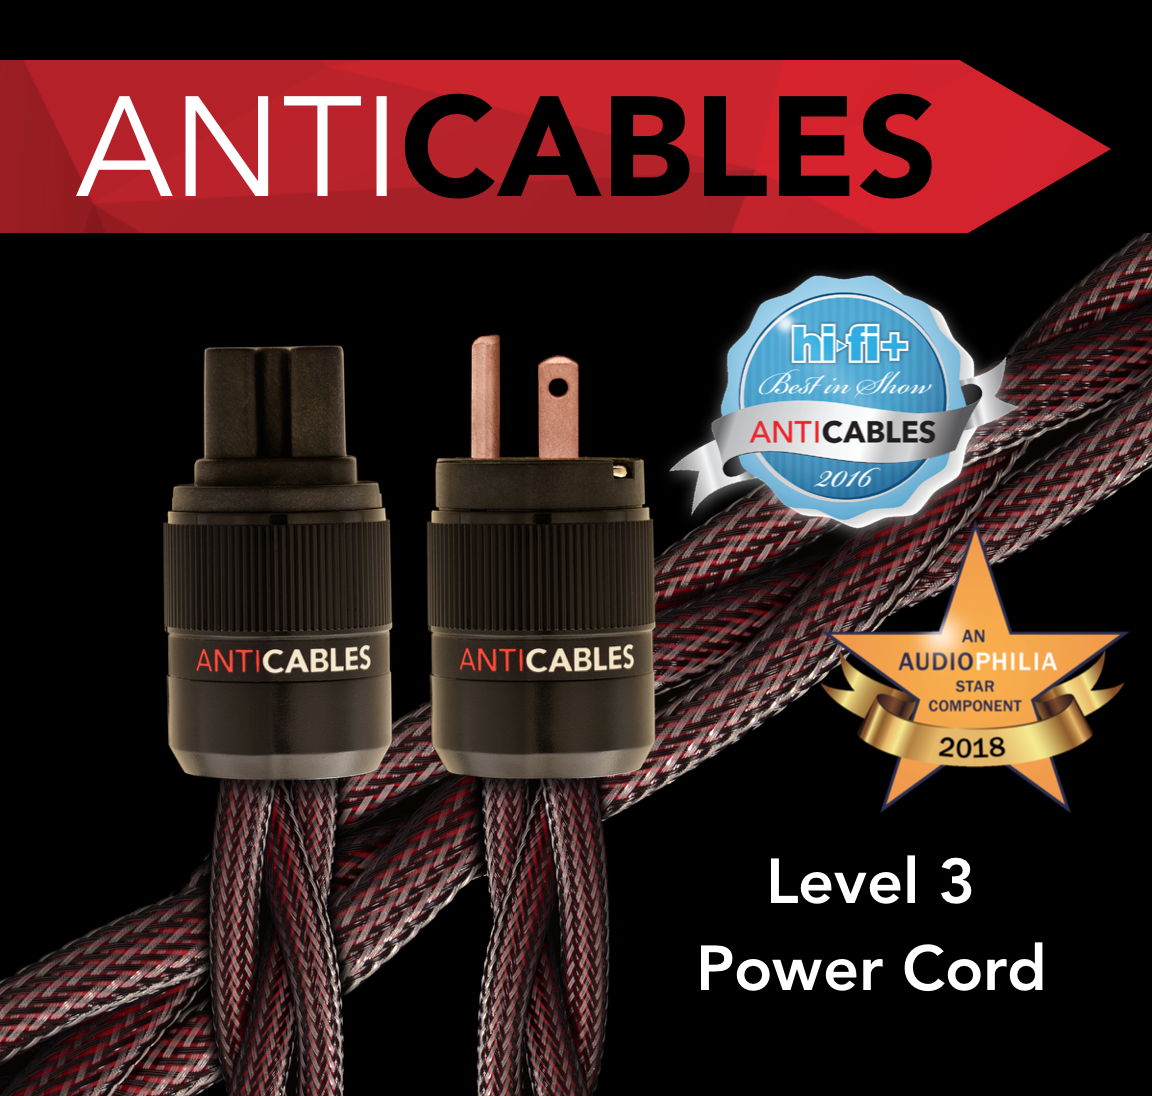 ANTICABLES Level 3 Power Cord  7 ft